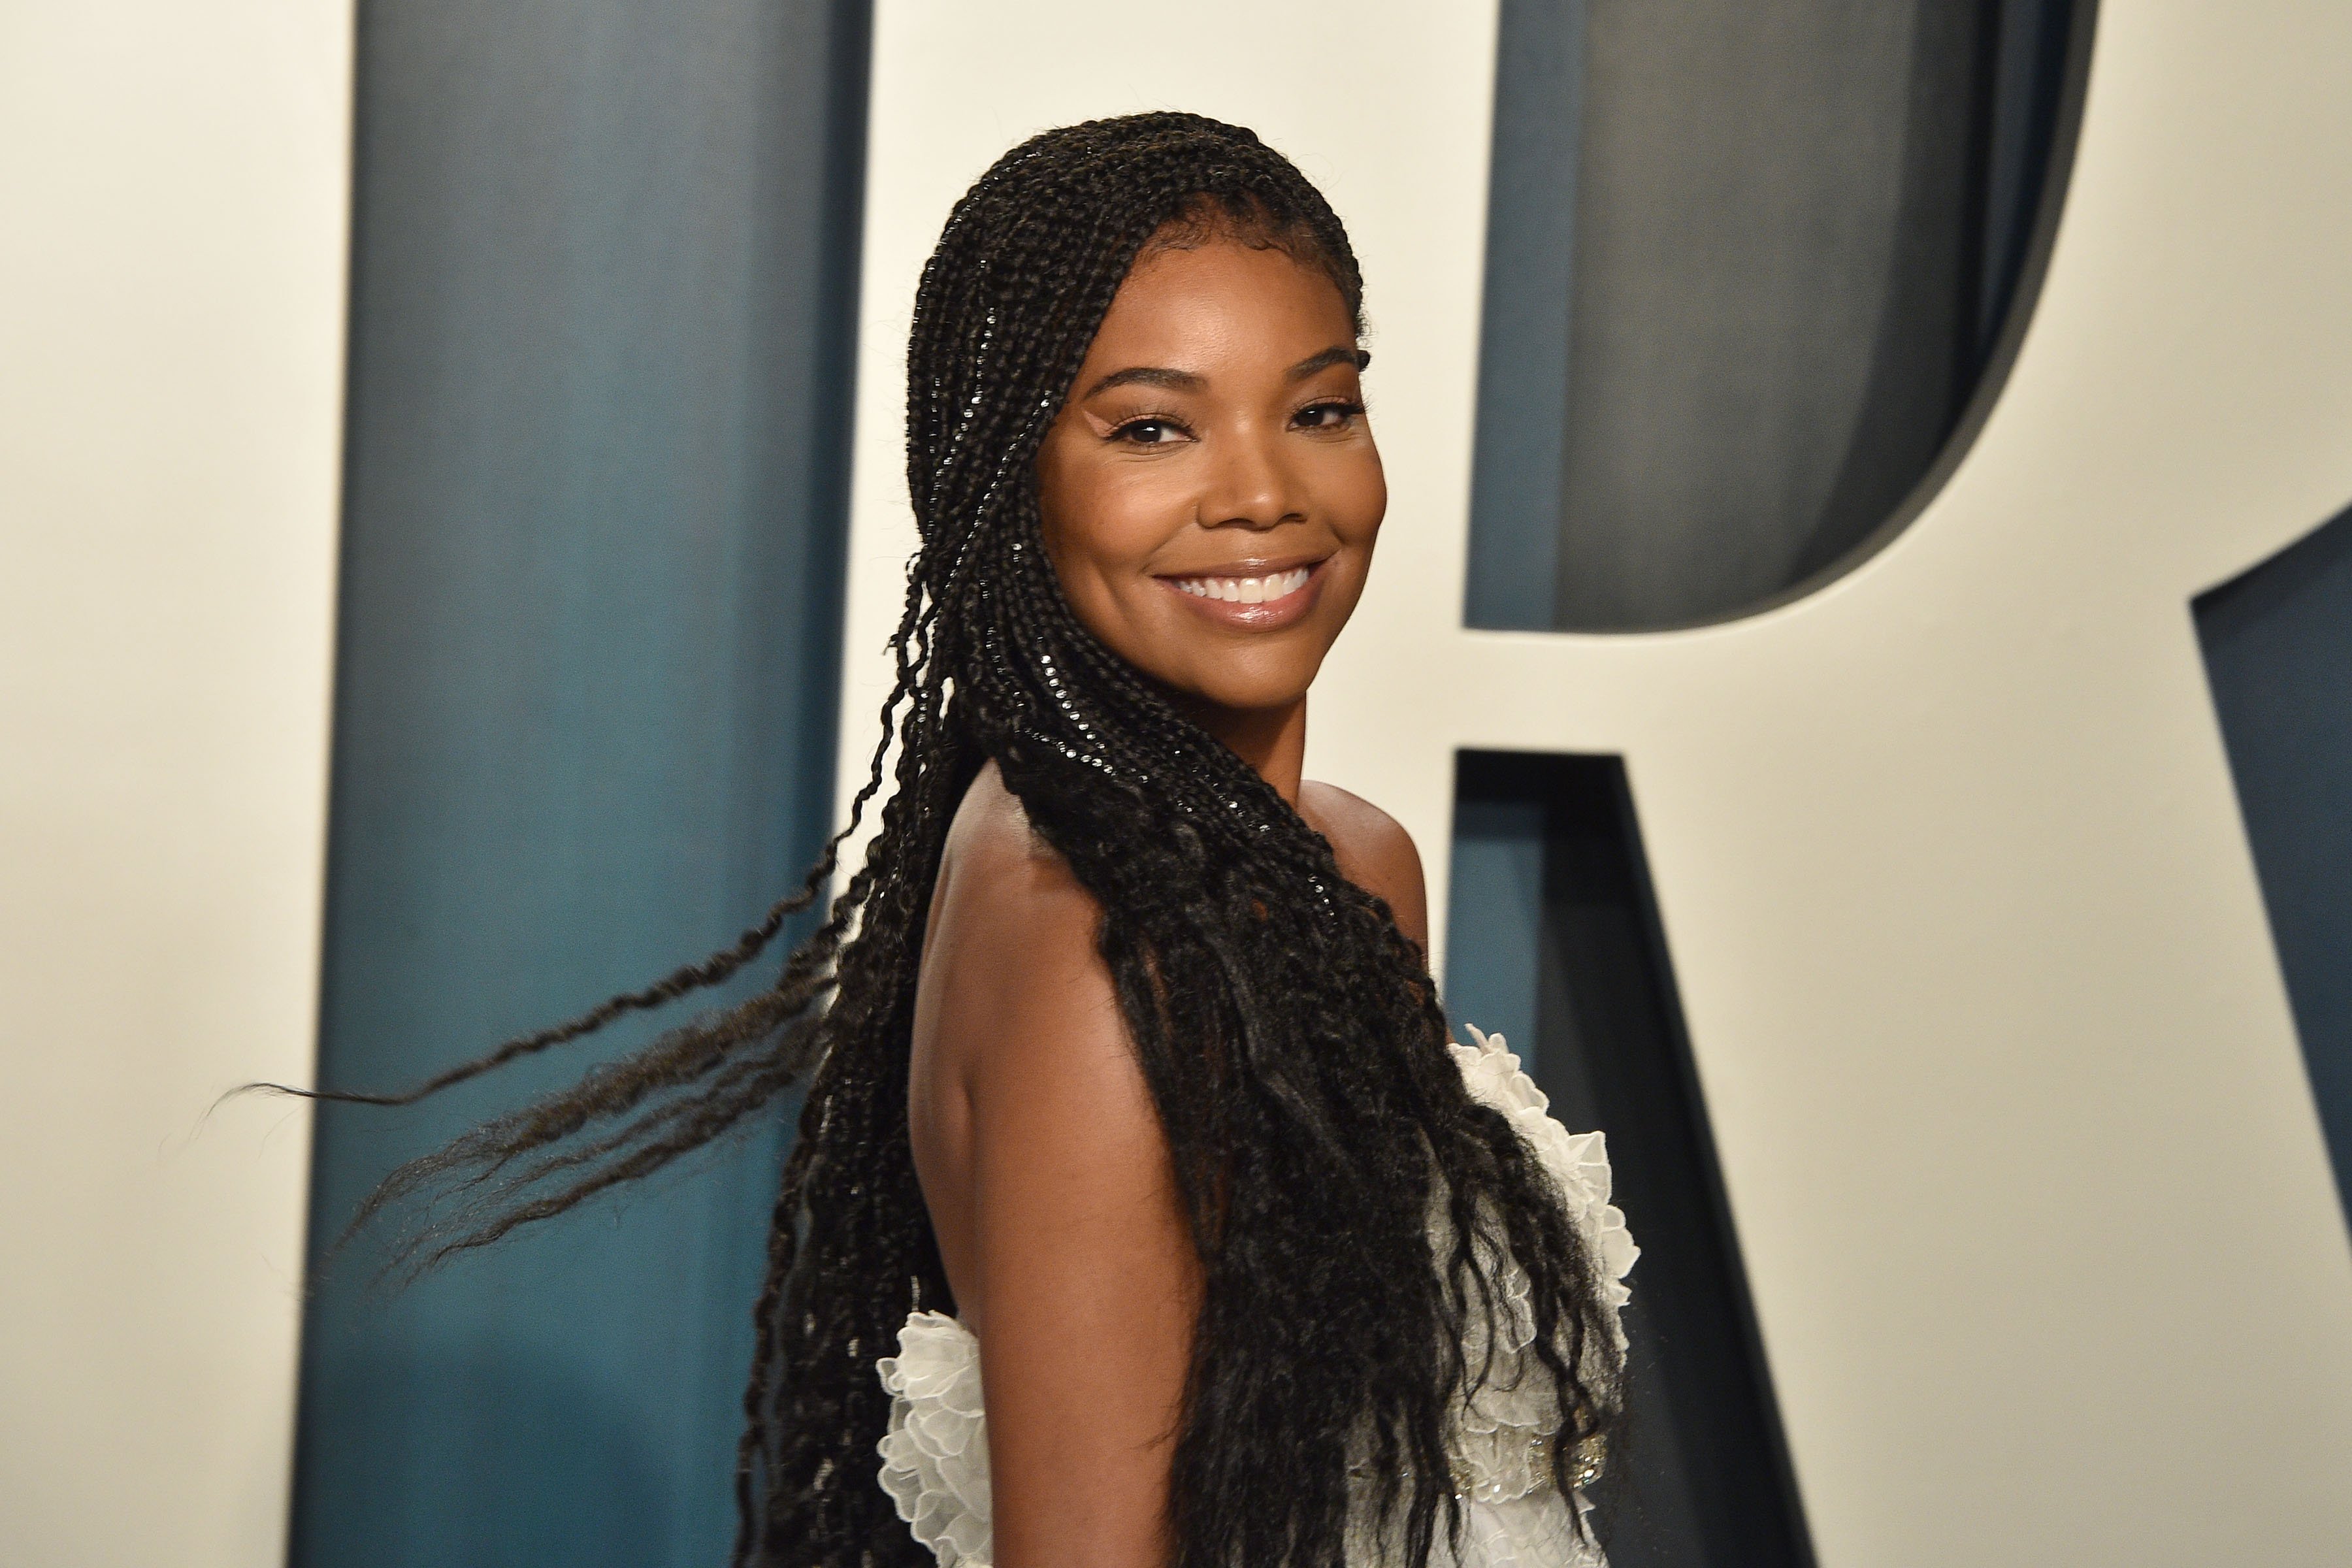 Gabrielle Union at the 2020 Vanity Fair Oscar Party at Wallis Annenberg Center for the Performing Arts on February 09, 2020 in Beverly Hills, California.| Source: Getty Images